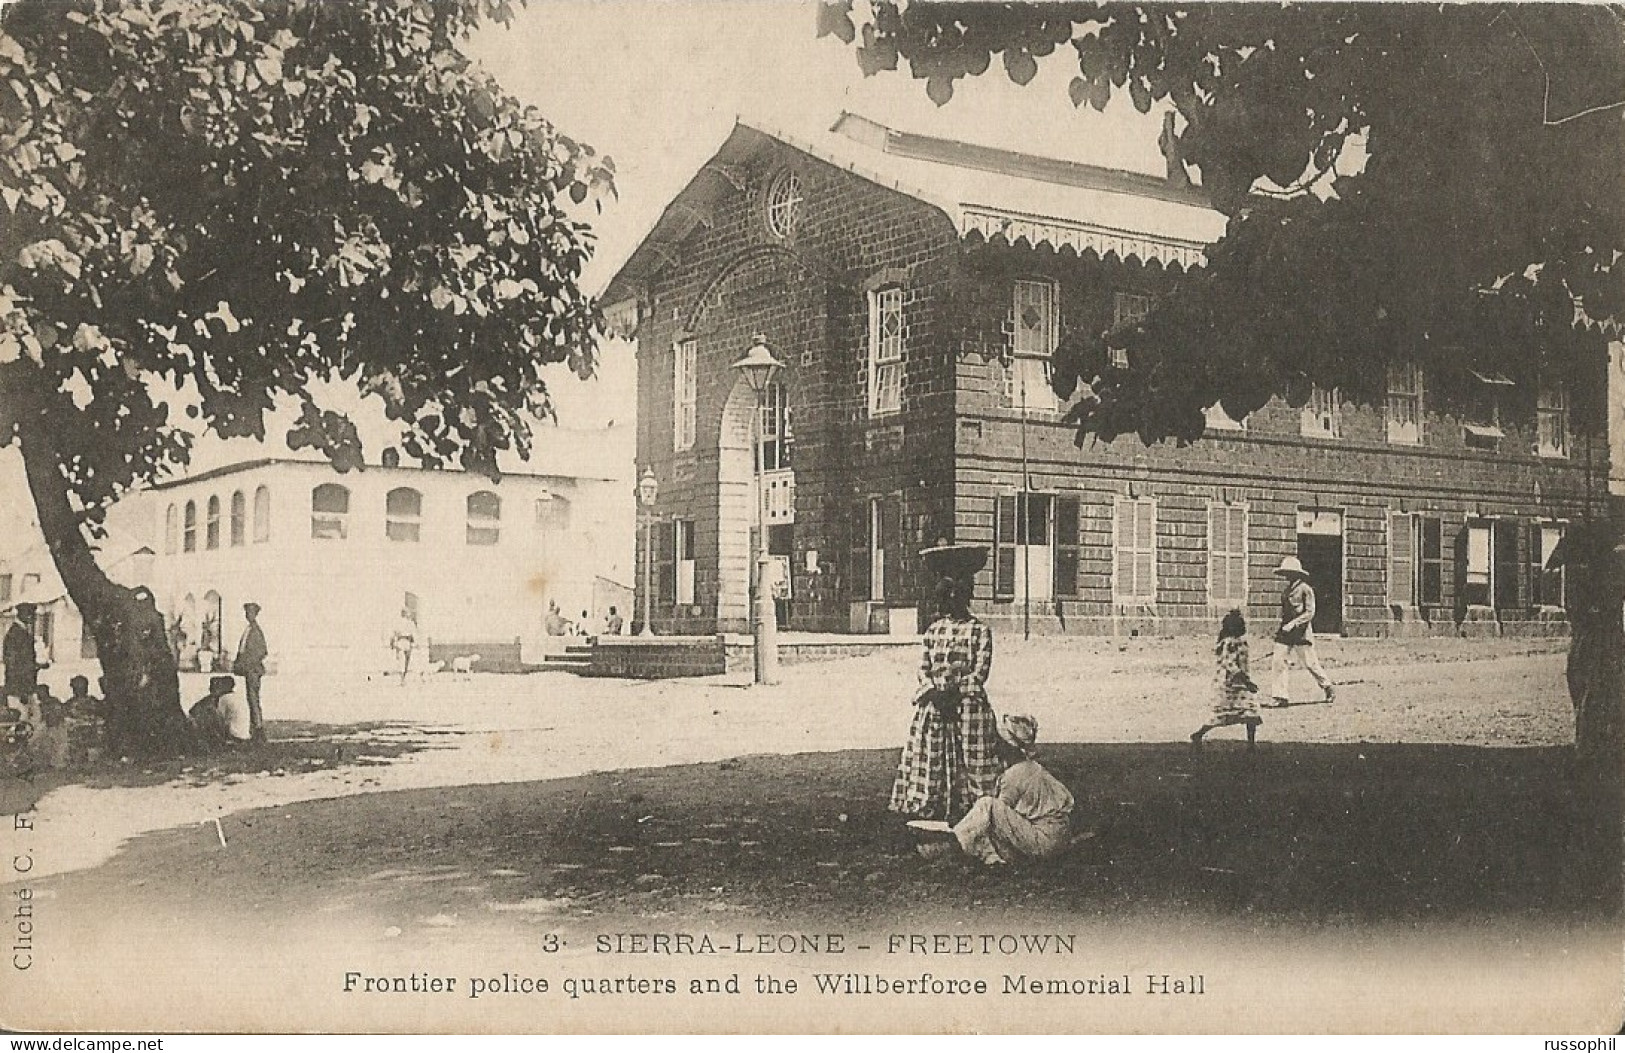 SIERRA LEONE - FREETOWN - FRONTIER POLICE QUARTERS AND THE WILBERFORCE MEMORIAL HALL - CLICHE C.F.A.O. - 1908 - Sierra Leona